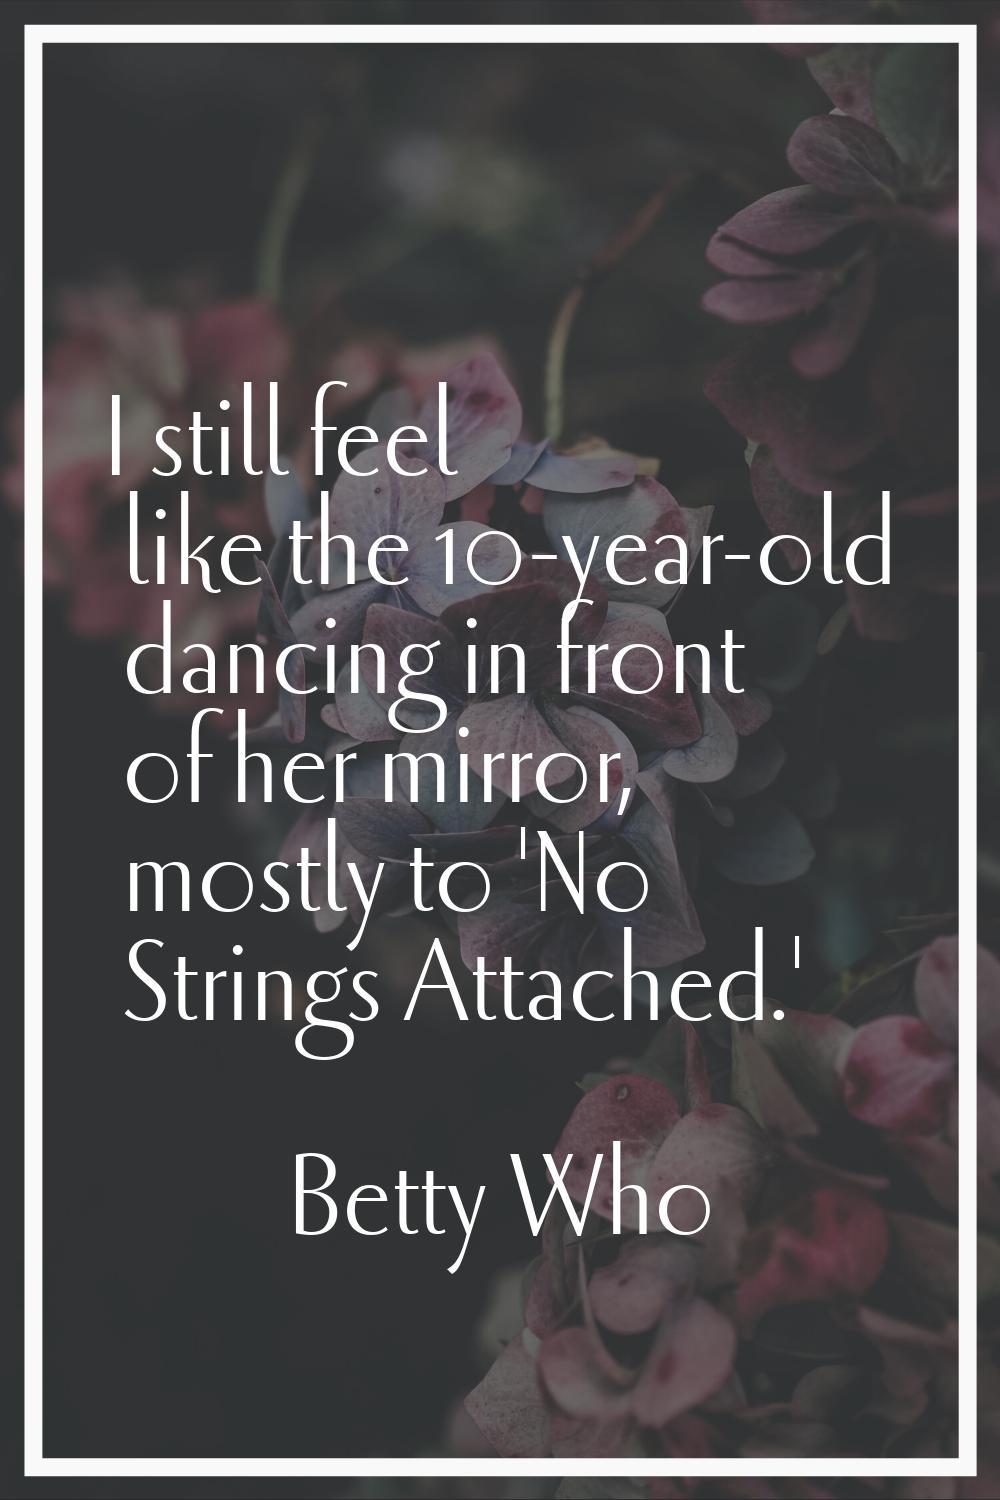 I still feel like the 10-year-old dancing in front of her mirror, mostly to 'No Strings Attached.'